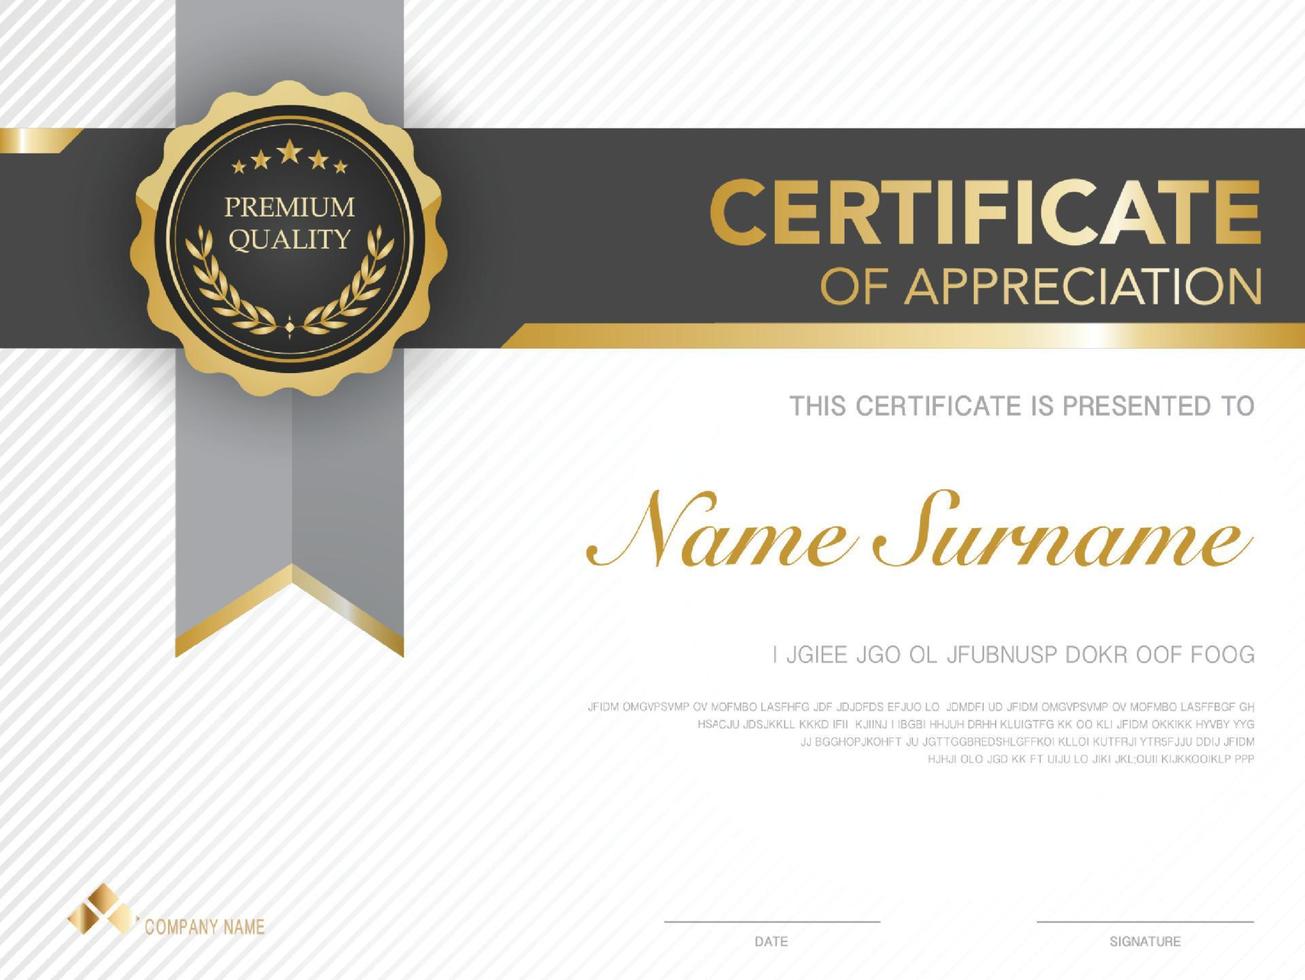 Certificate template black and gold with luxury style image. Diploma of geometric modern design. eps10 vector